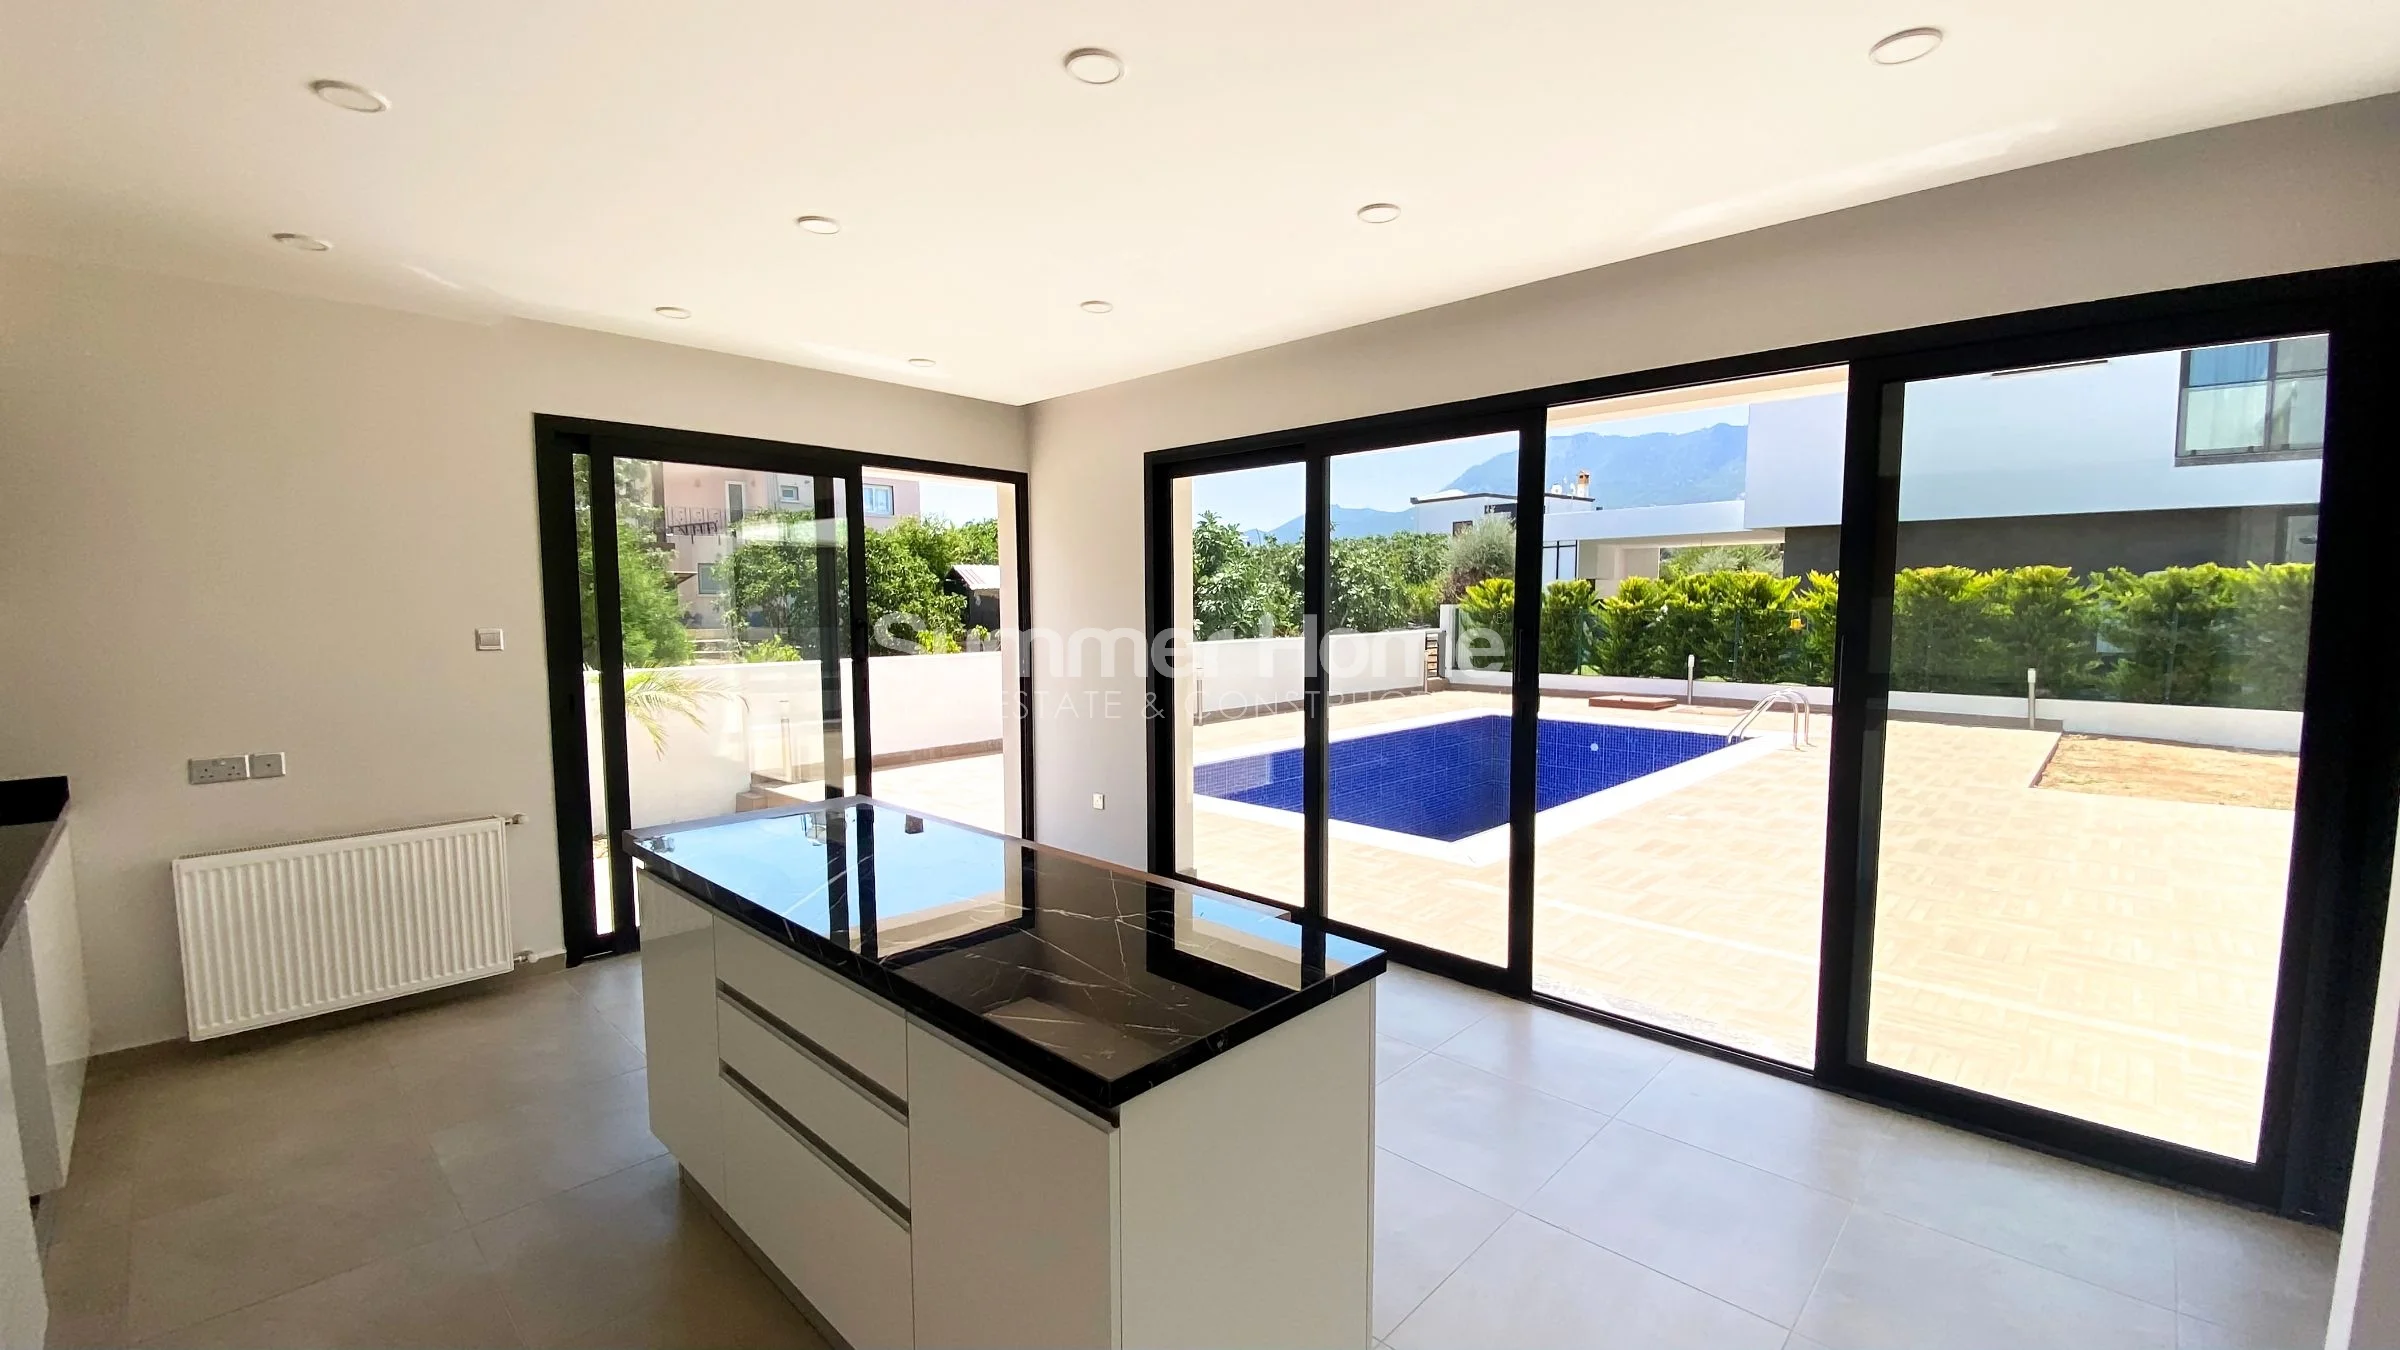 Recently completed well-located villas in Kyrenia, Cyprus Interior - 7